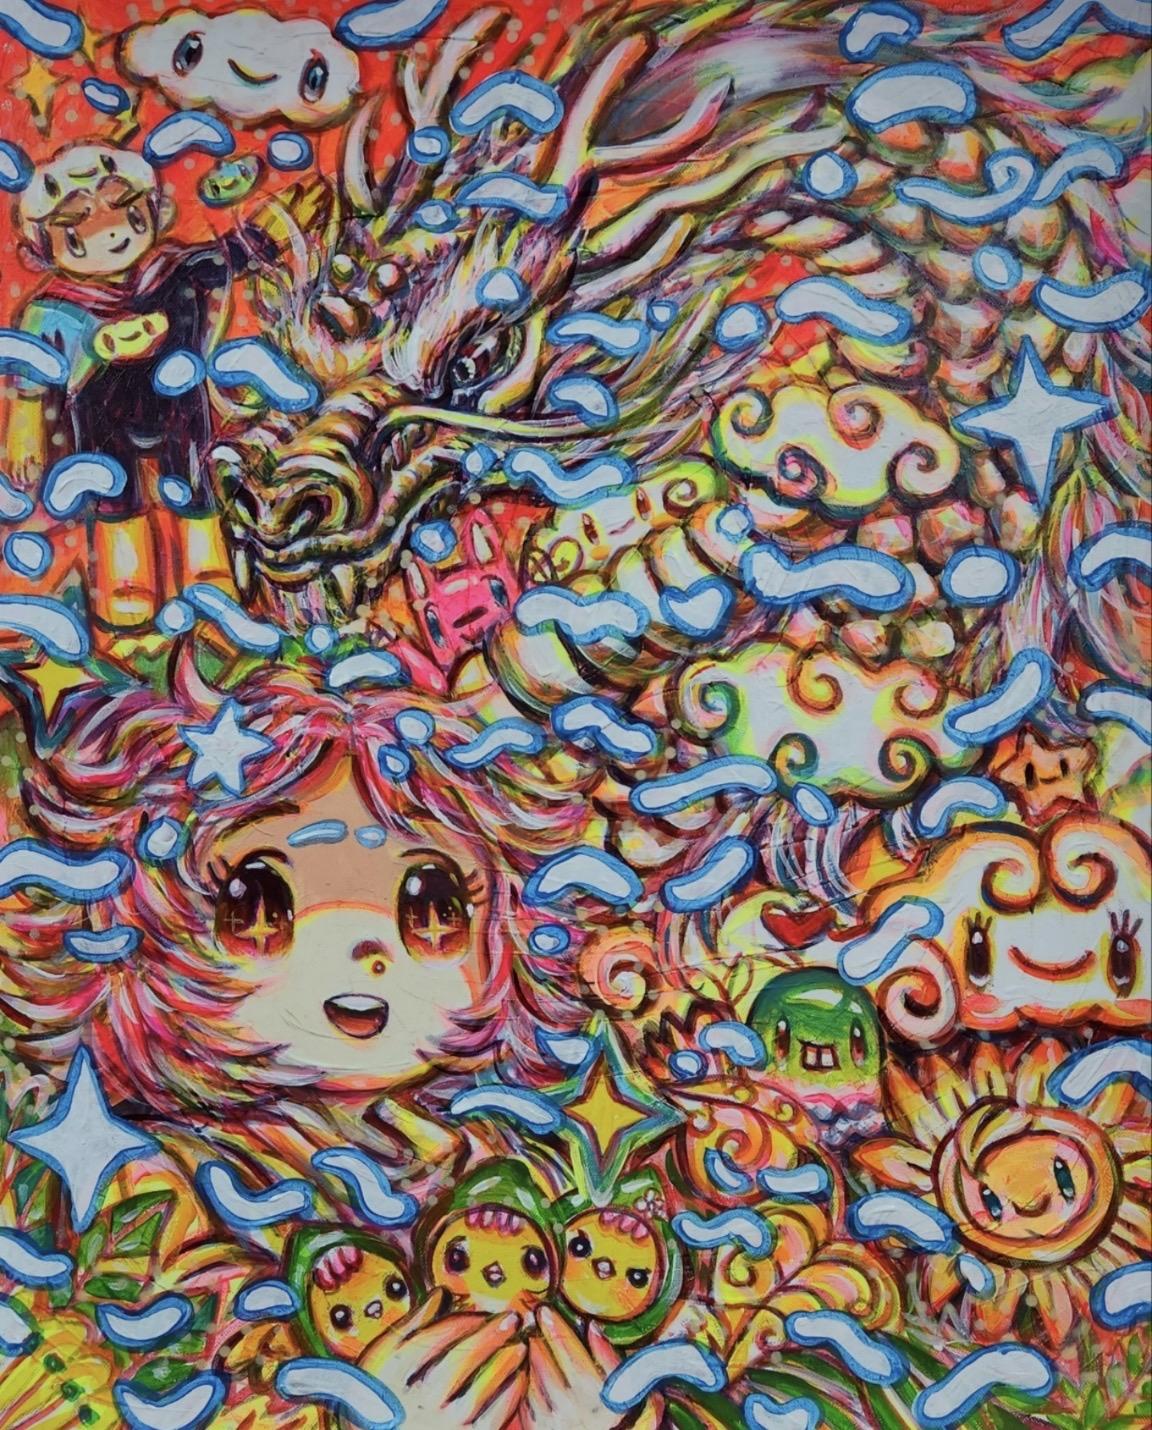 Acrylic on canvas

Shin Seung-Hun is a South-Korean artist born in 1979 who lives & works in Jeju Island, Korea. He is considered by critics as the new Korean Takashi Murakami. The pure world of the artist depicts and dreams of a beautiful world